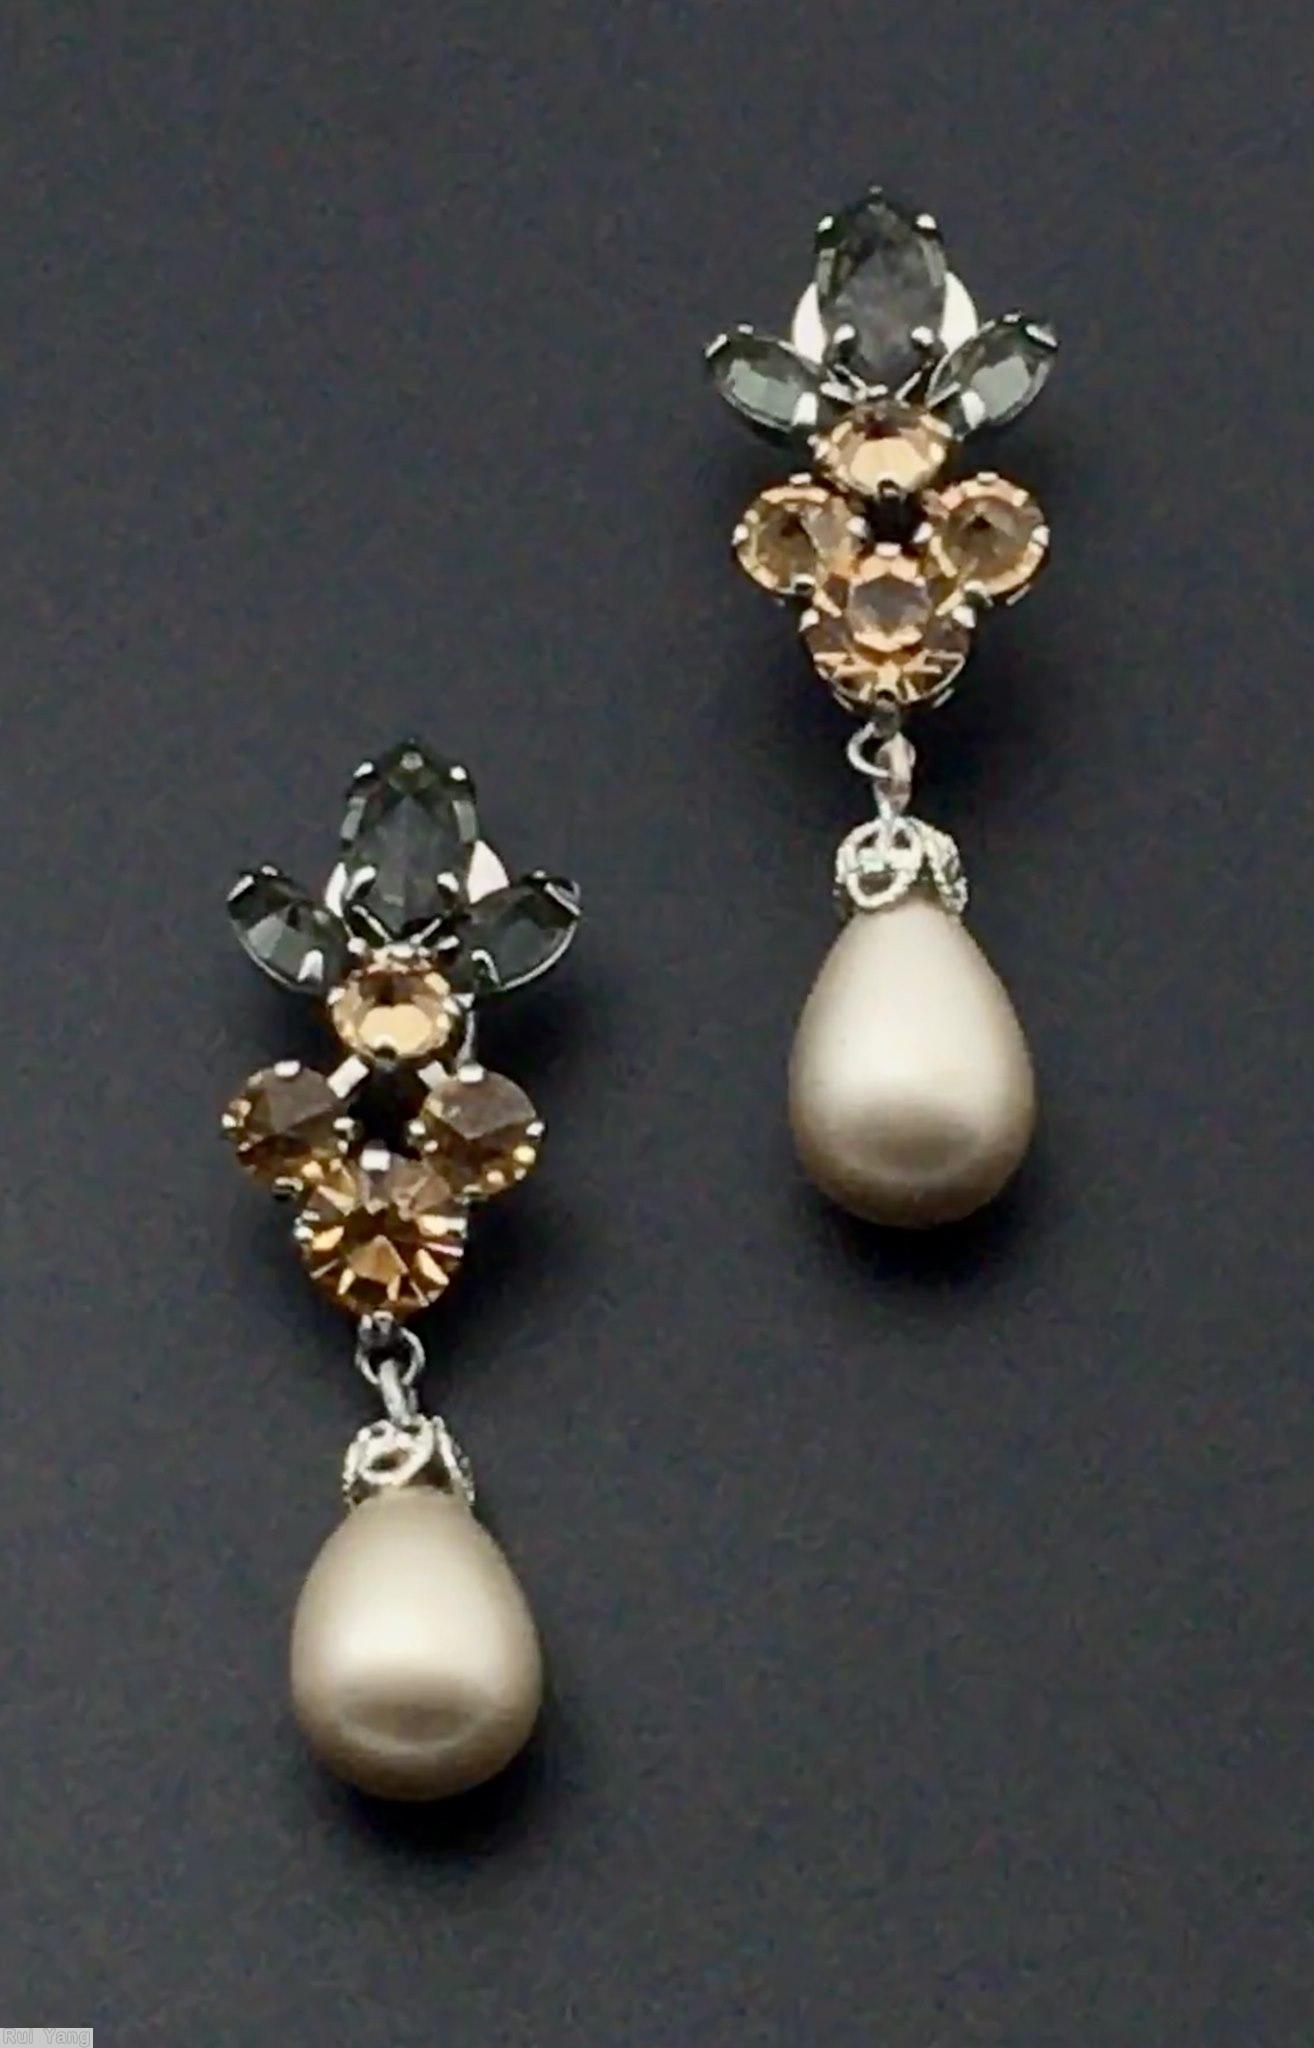 Schreiner dangling earring 1 large teardrop 4 small chaton group 3 navette top faux pearl clear champgne smoke jewelry